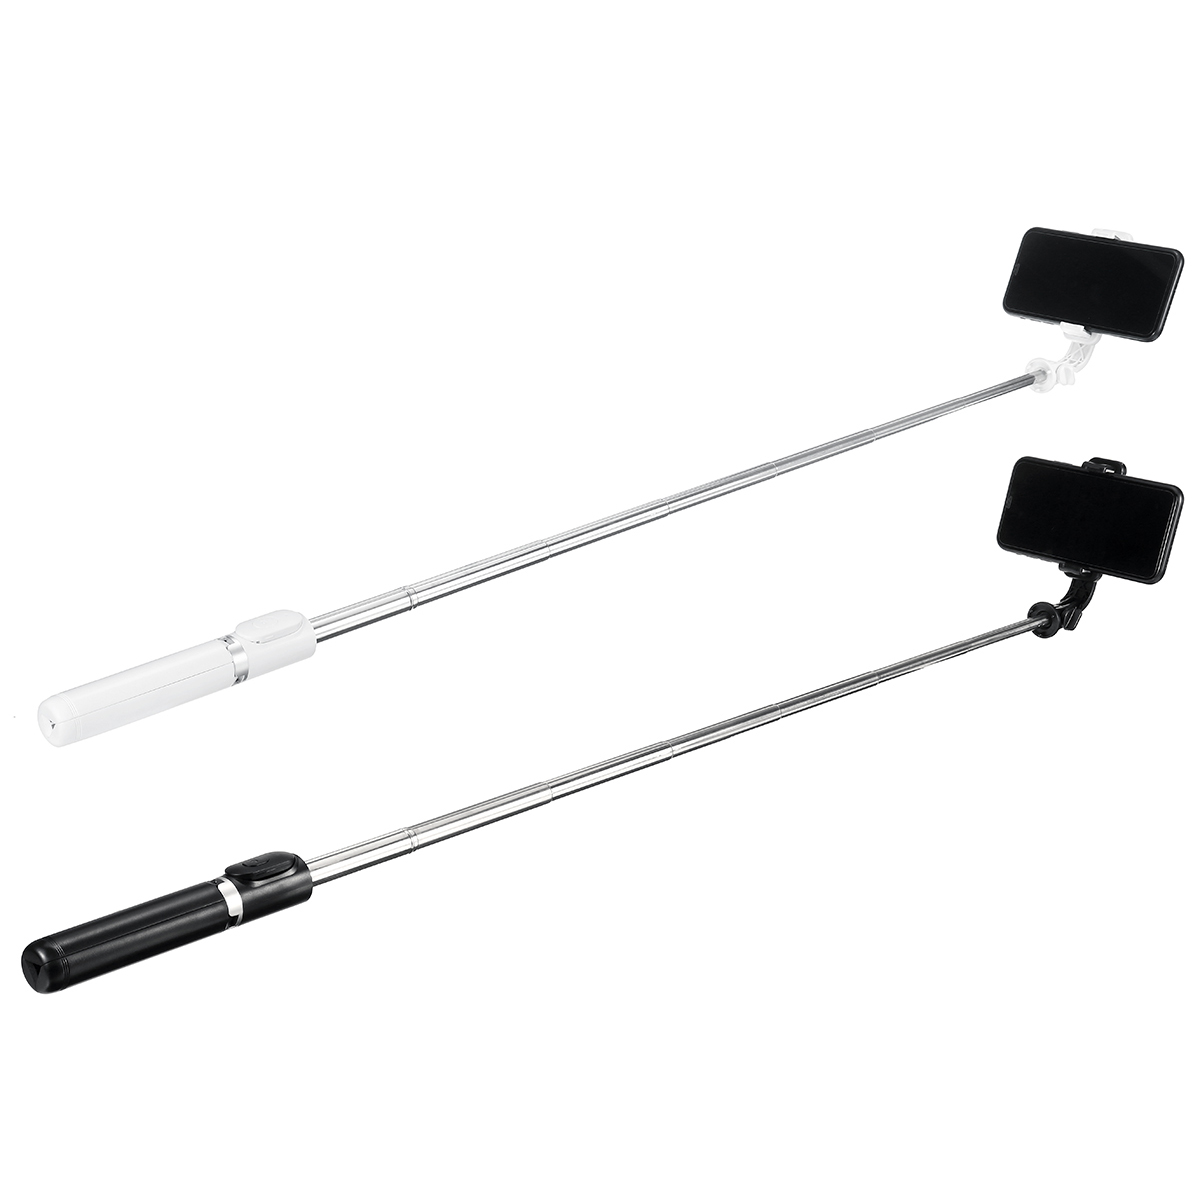 Bakeey-Q03-Selfie-Stick-Tripod-Hand-Gimbals-3-In-1-Multi-Modes-Wireless-bluetooth-Remote-Control-360-1818373-10